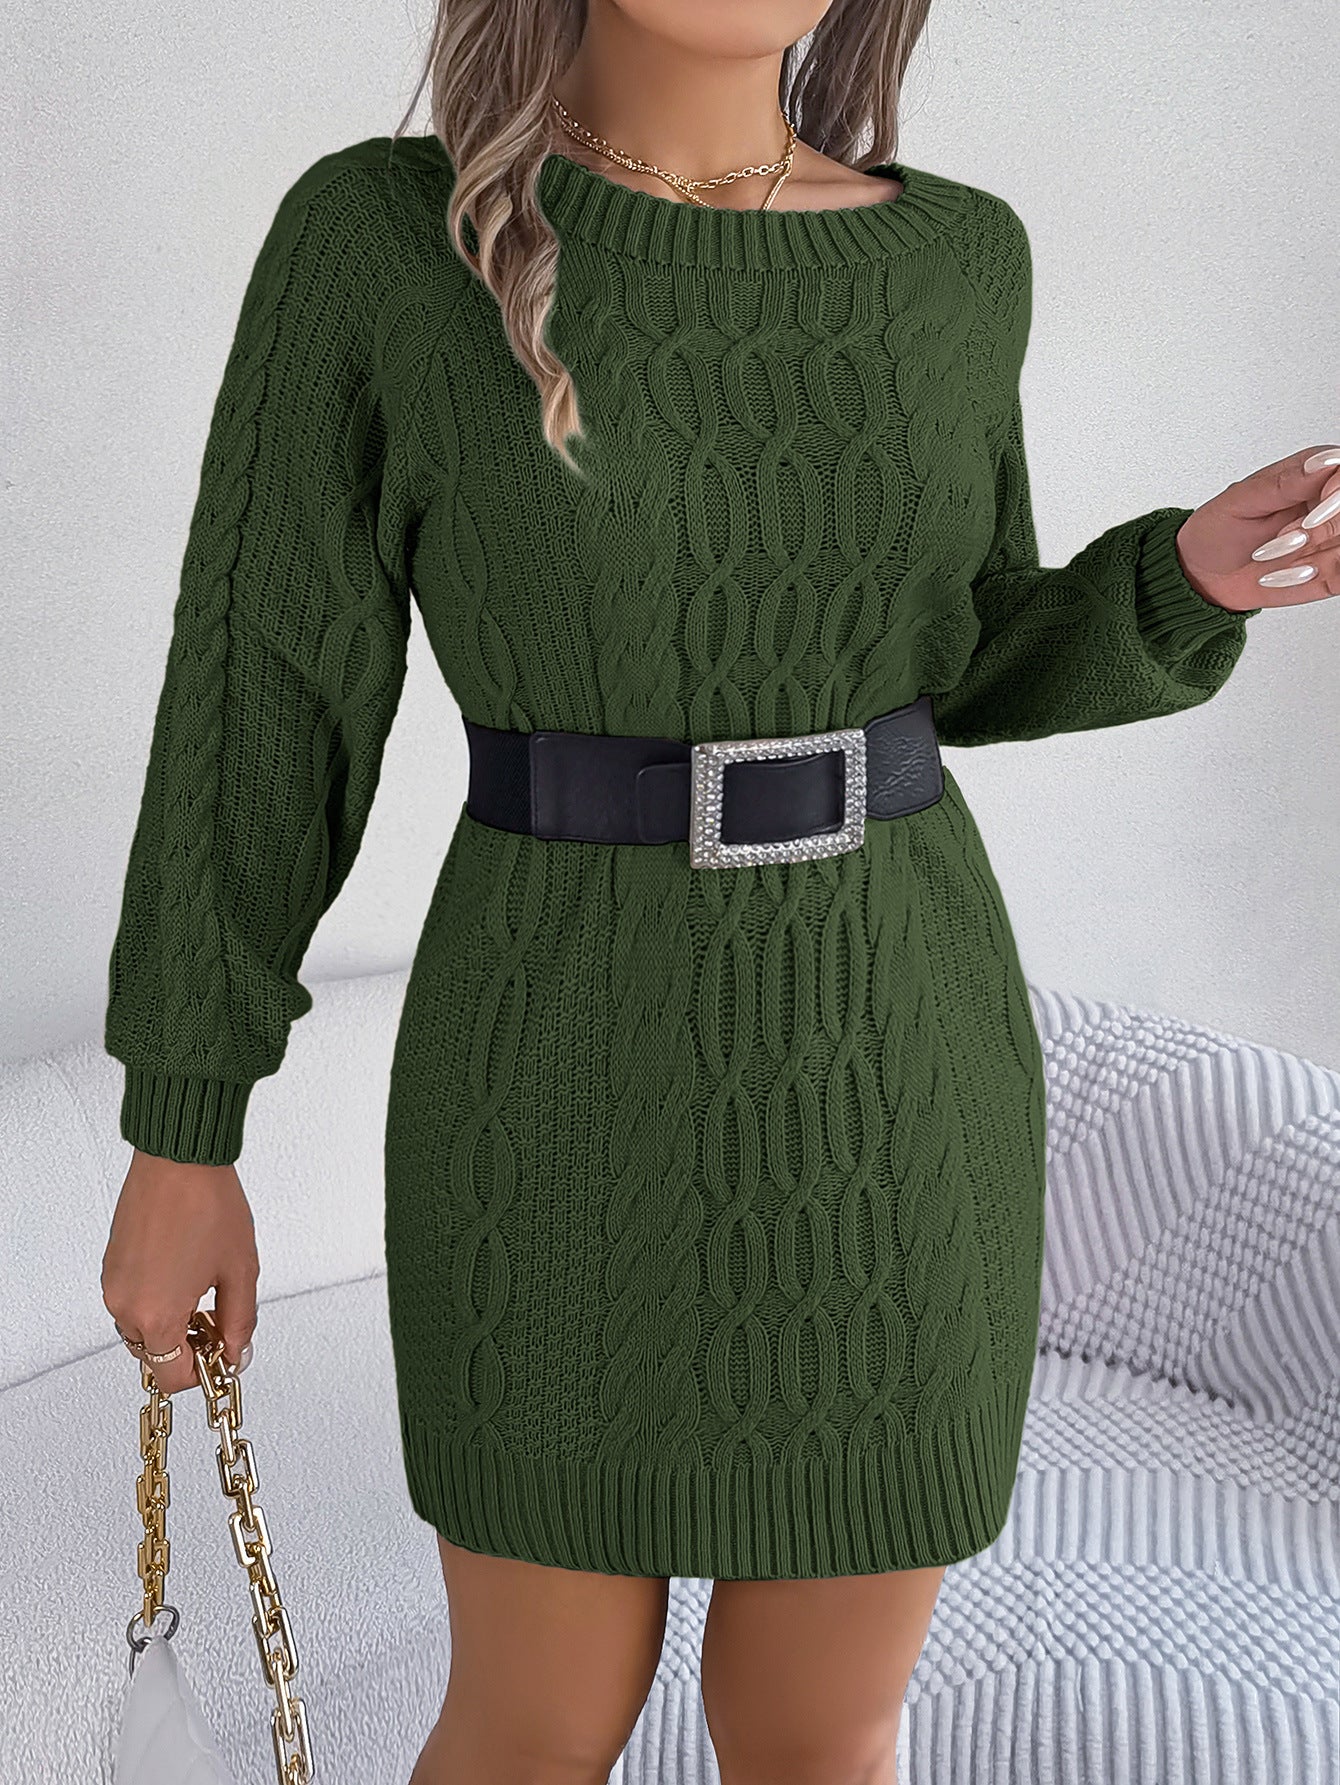 Women's Sweater Dress Knit Long Sleeve Chunky Casual Dresses Pullover Tops